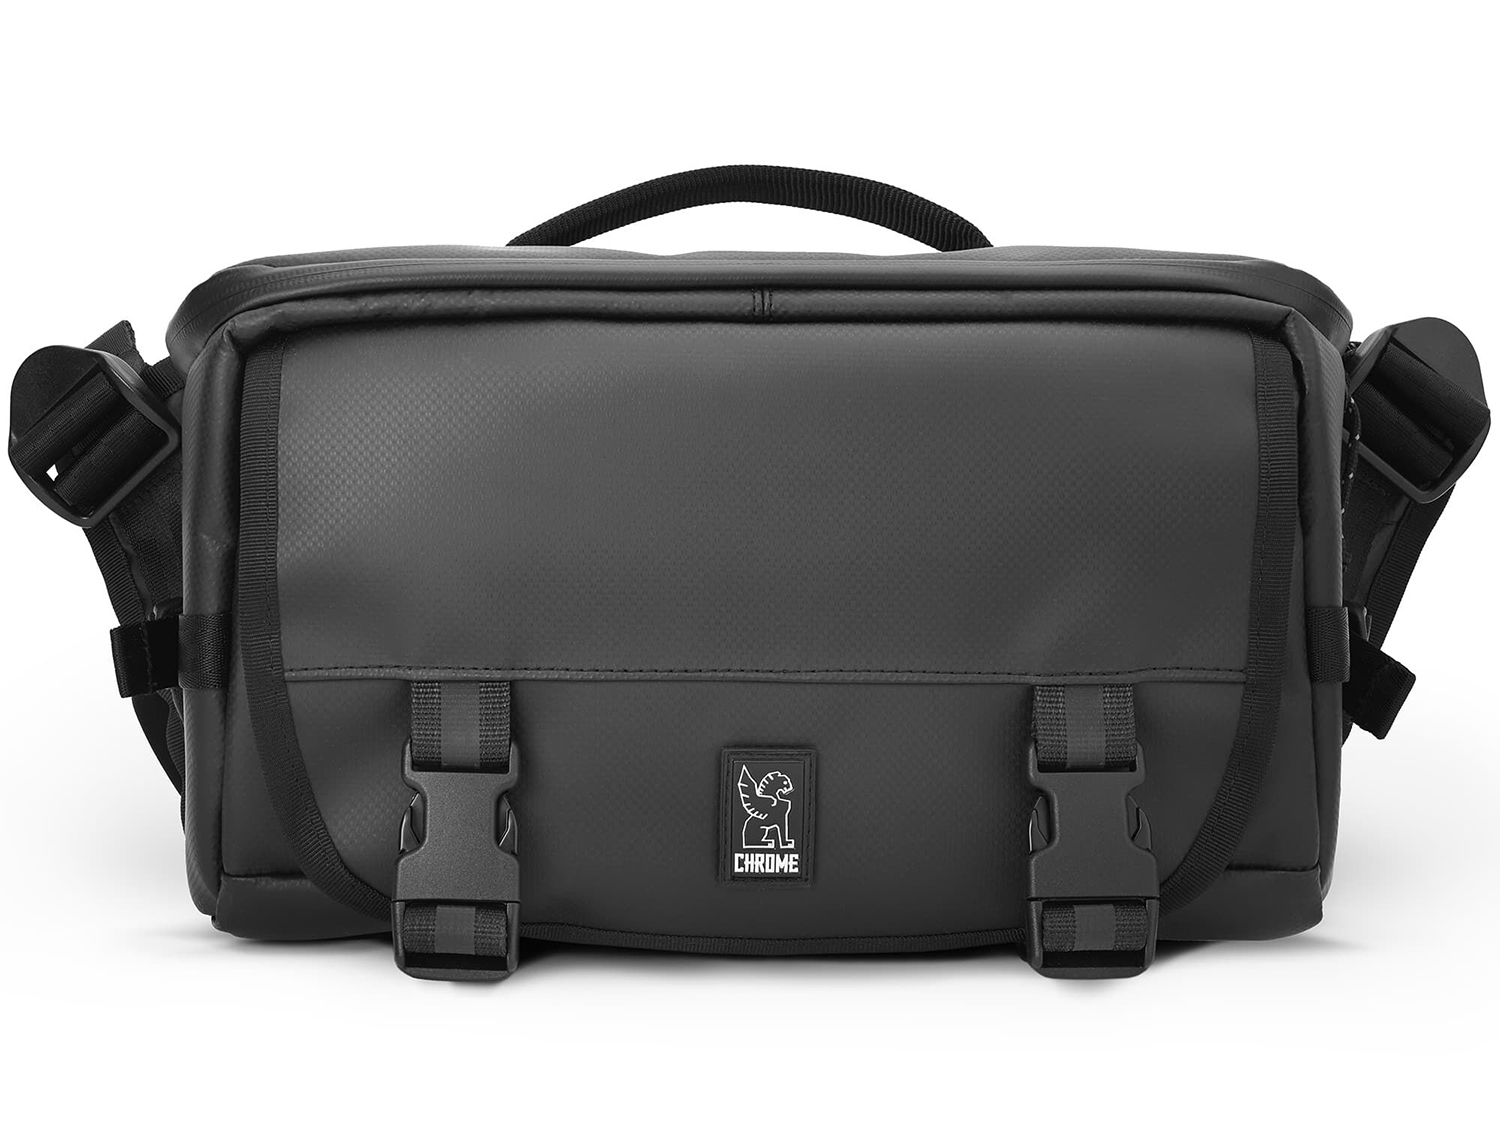 Chrome’s new sling bag is perfect for photographers who want to travel ...